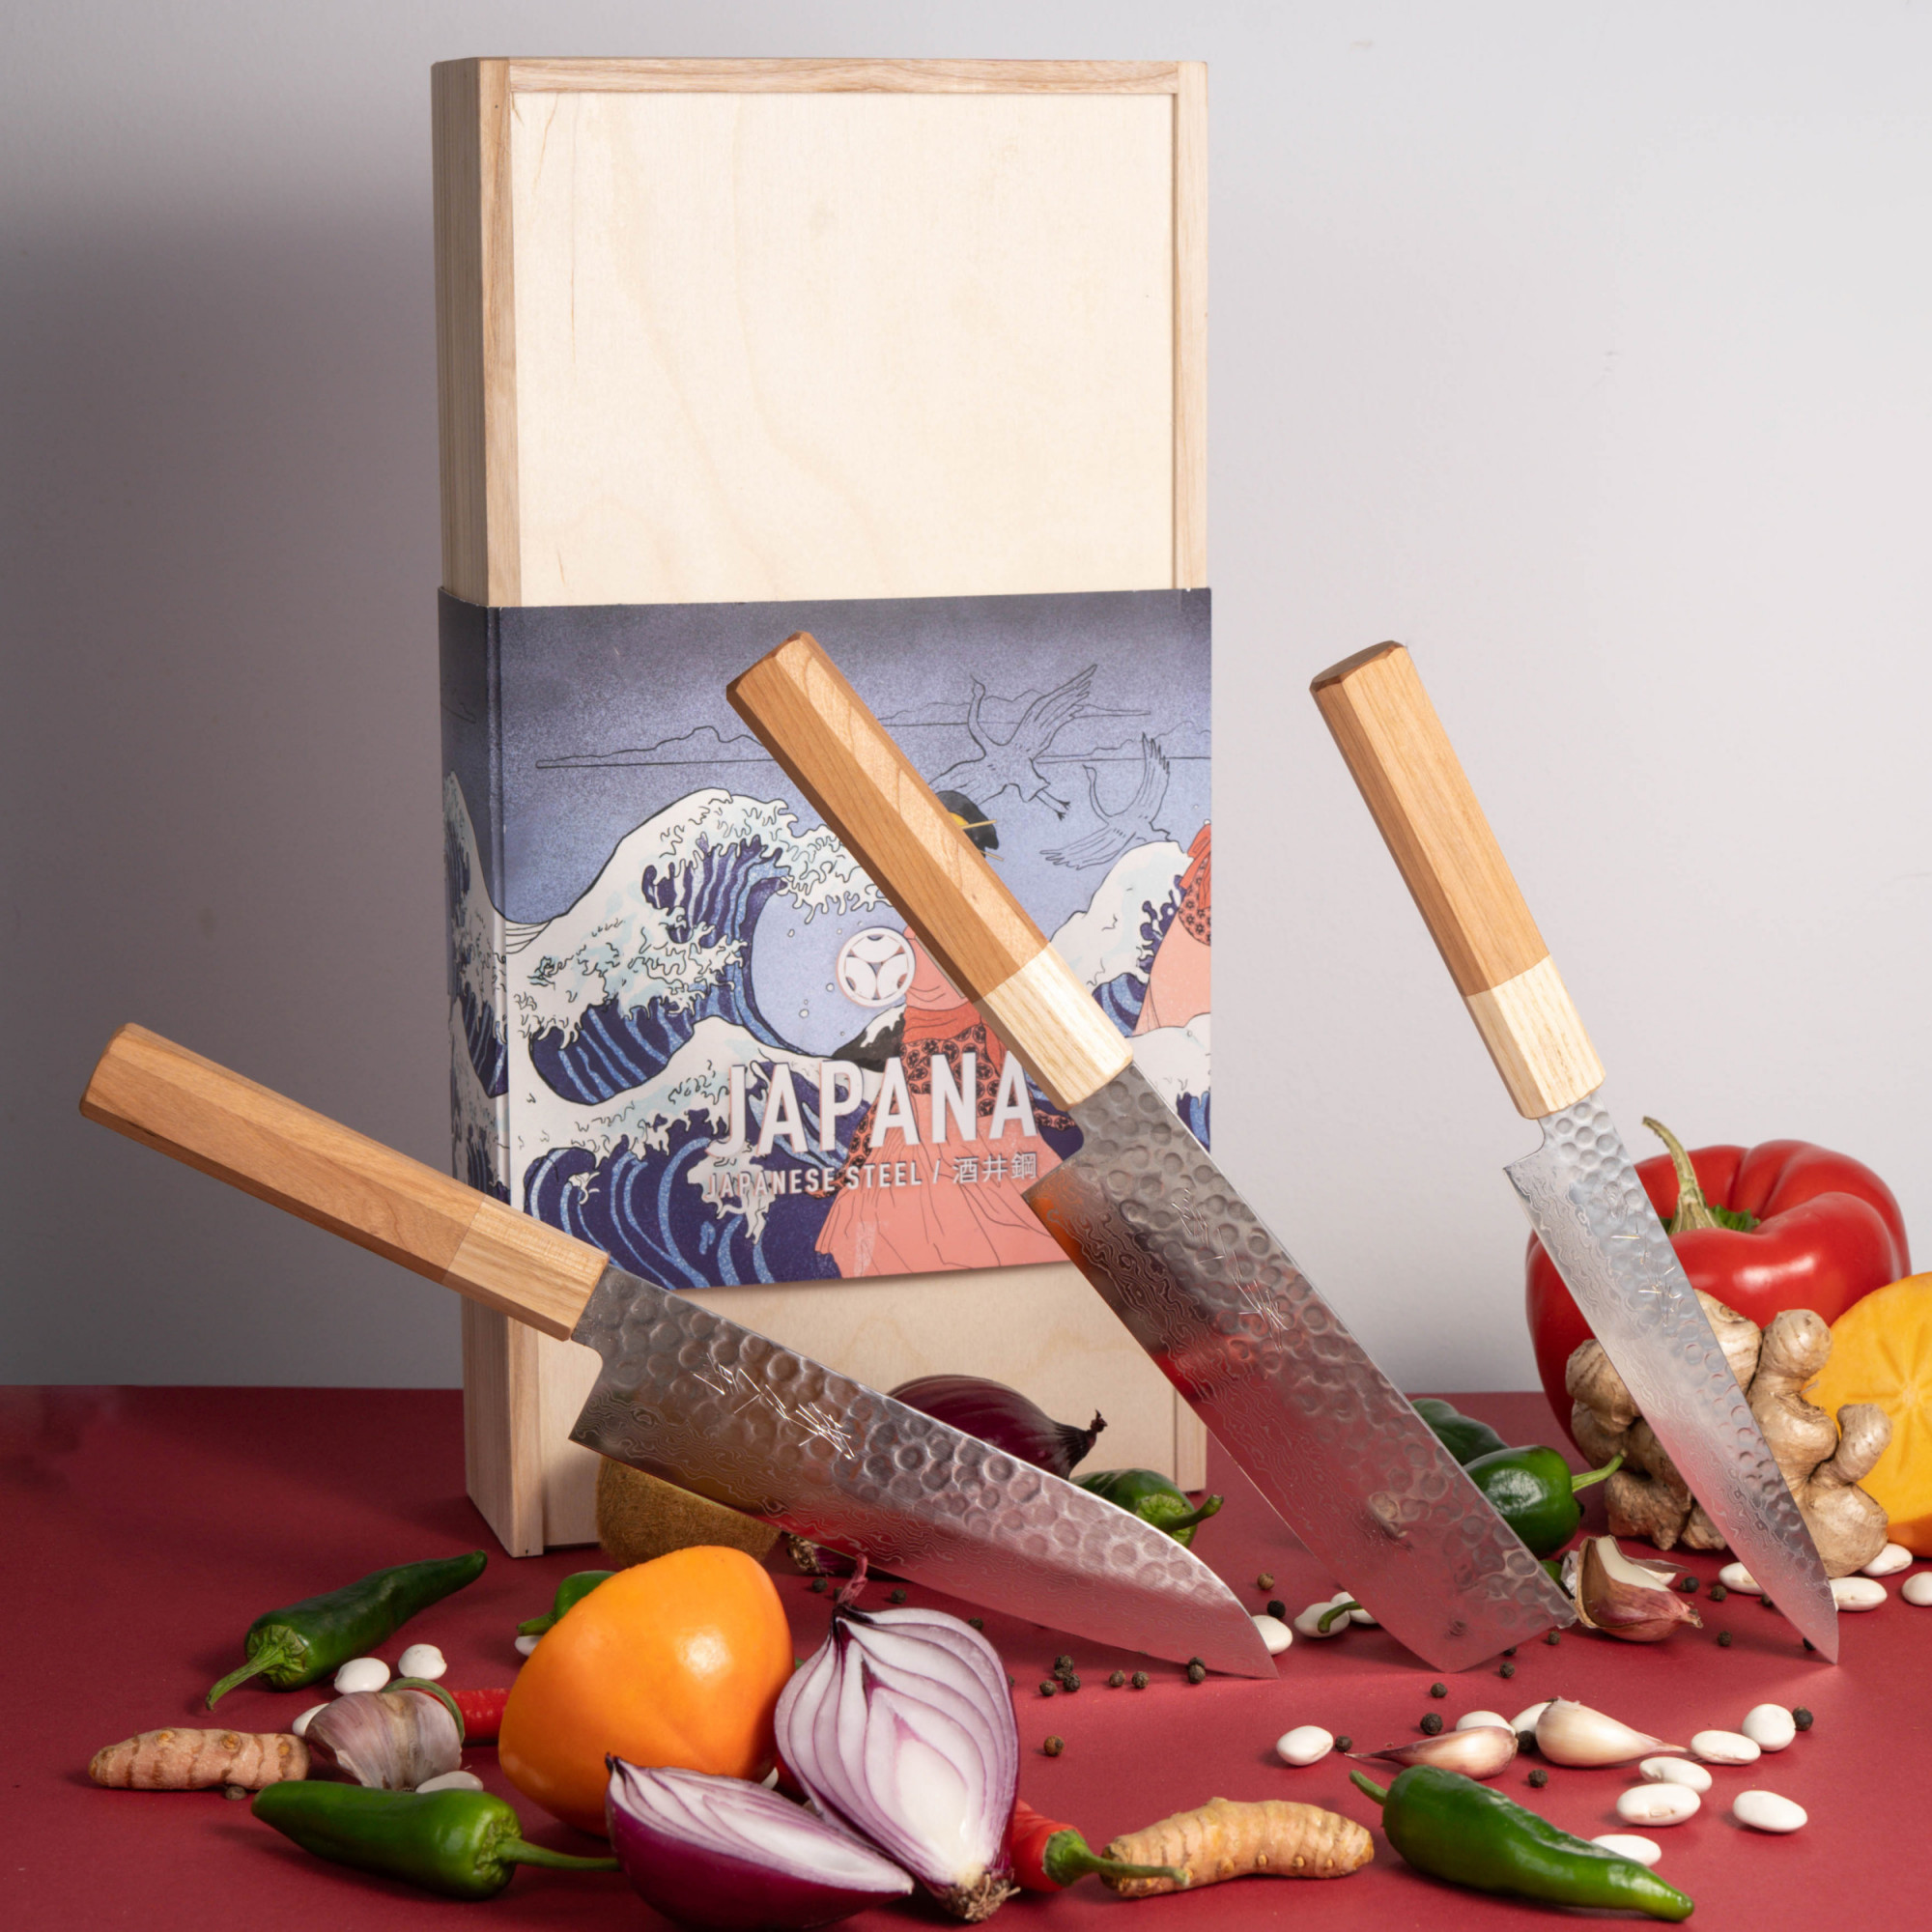 sakai kyuba cutting lifestyle japanese knife in the kitchen cut vegetables daily chefs knife japanese knife high quality premium knives with packagin onna buggeisha